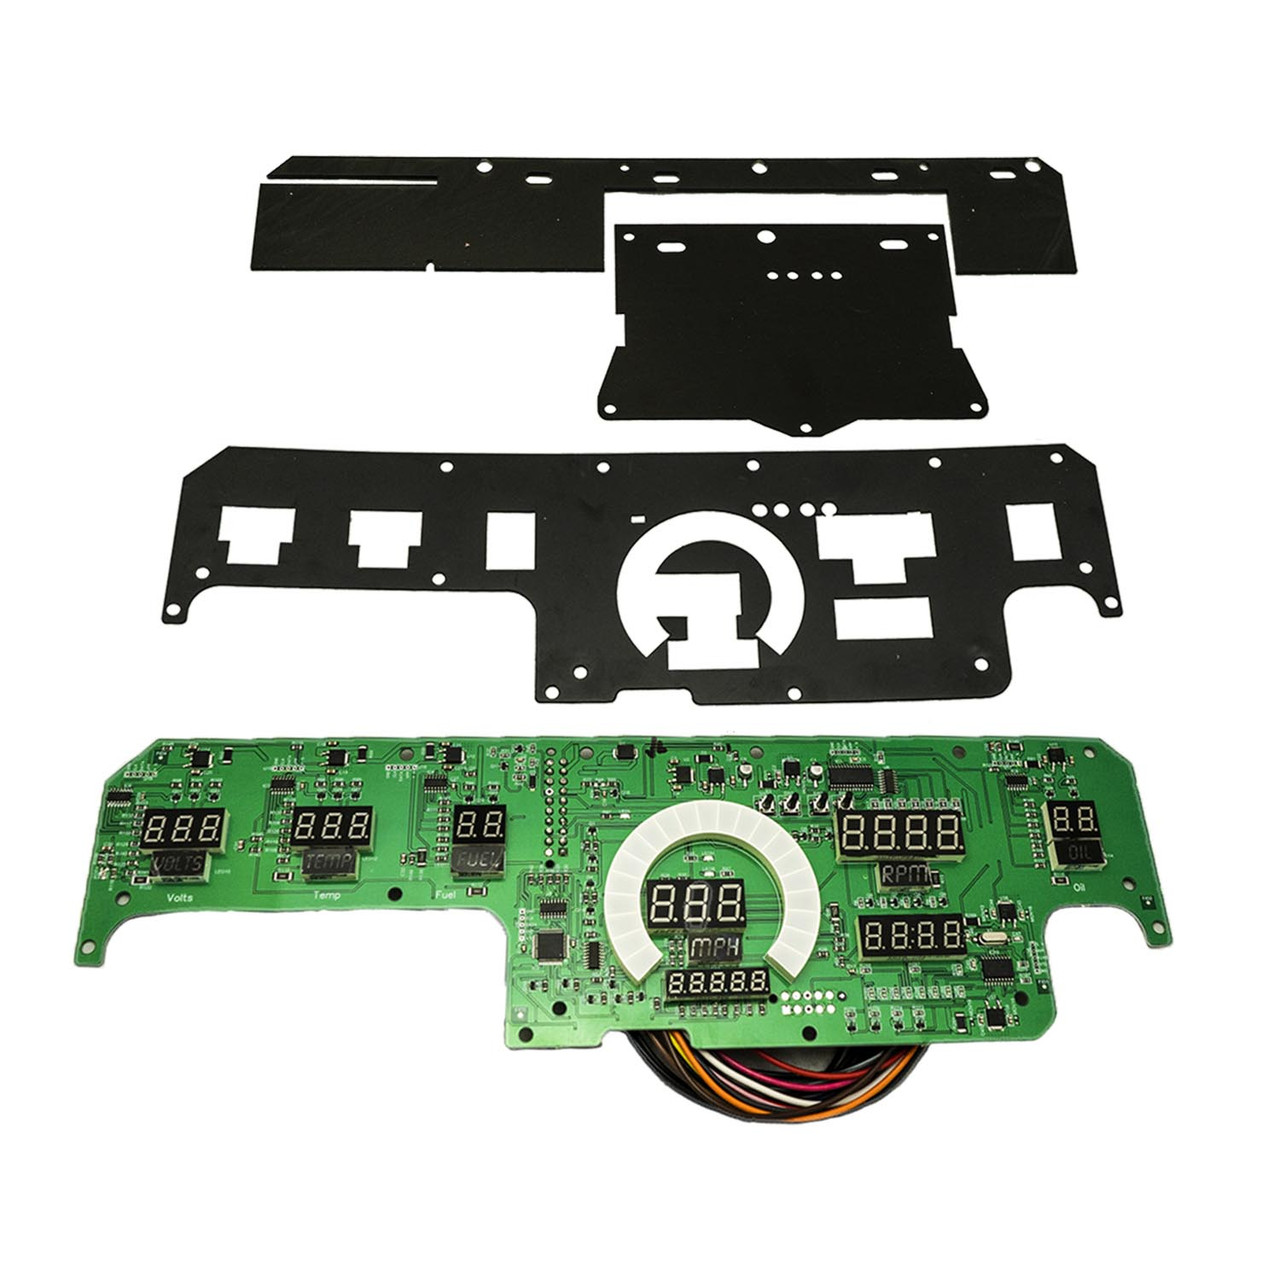 Panel and parts - DP1805